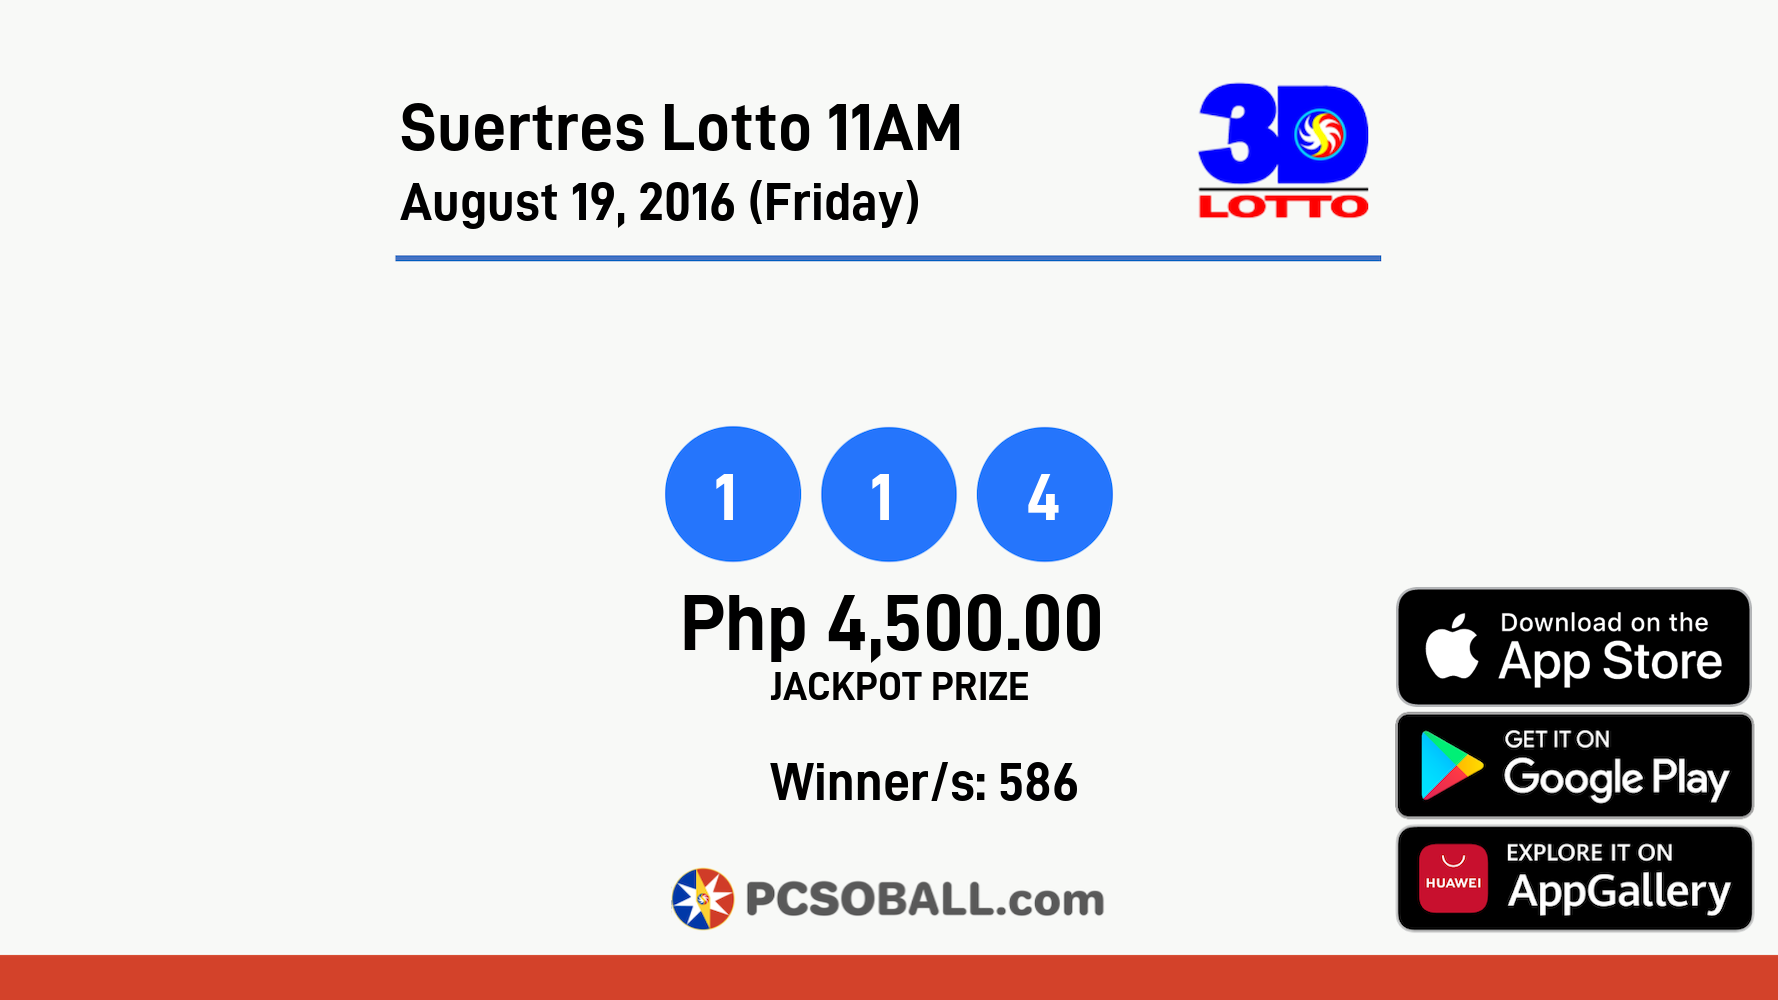 Suertres Lotto 11AM August 19, 2016 (Friday) Result